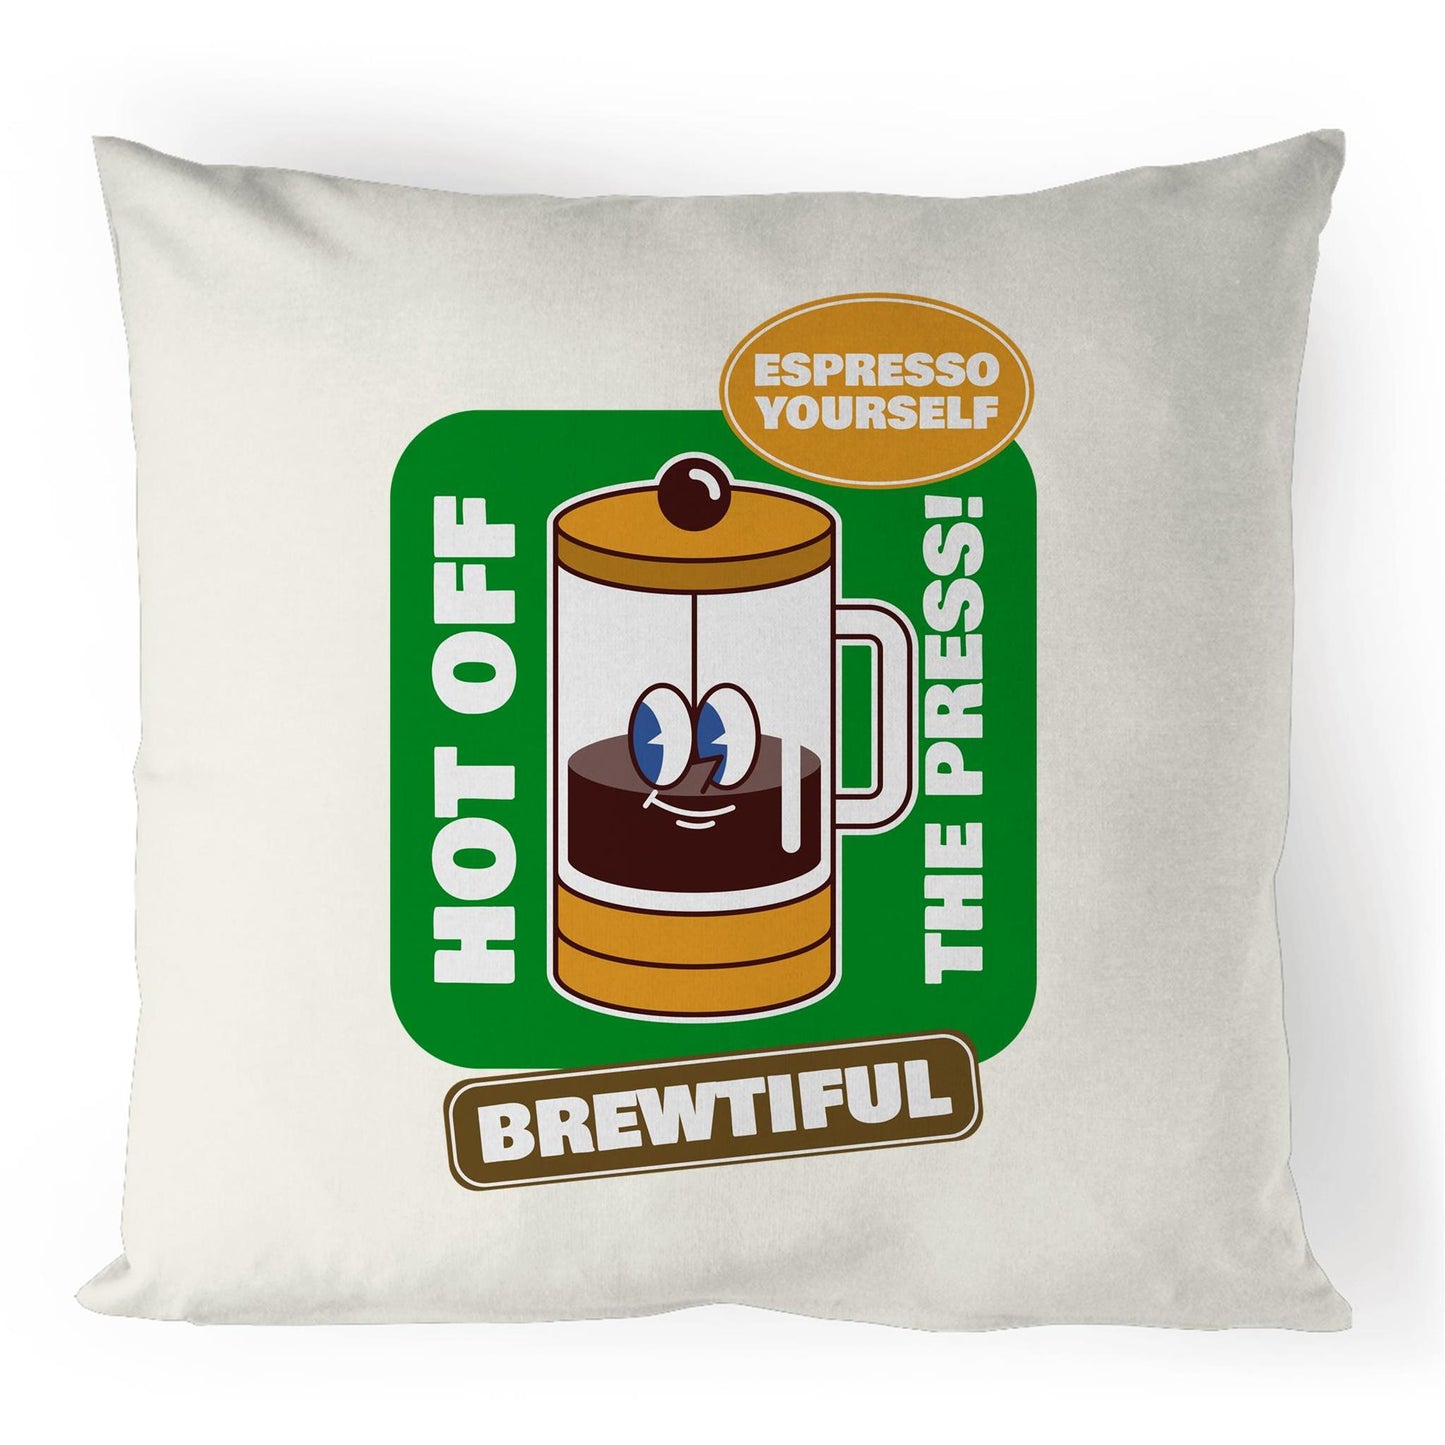 Brewtiful, Espresso Yourself - 100% Linen Cushion Cover Default Title Linen Cushion Cover Coffee